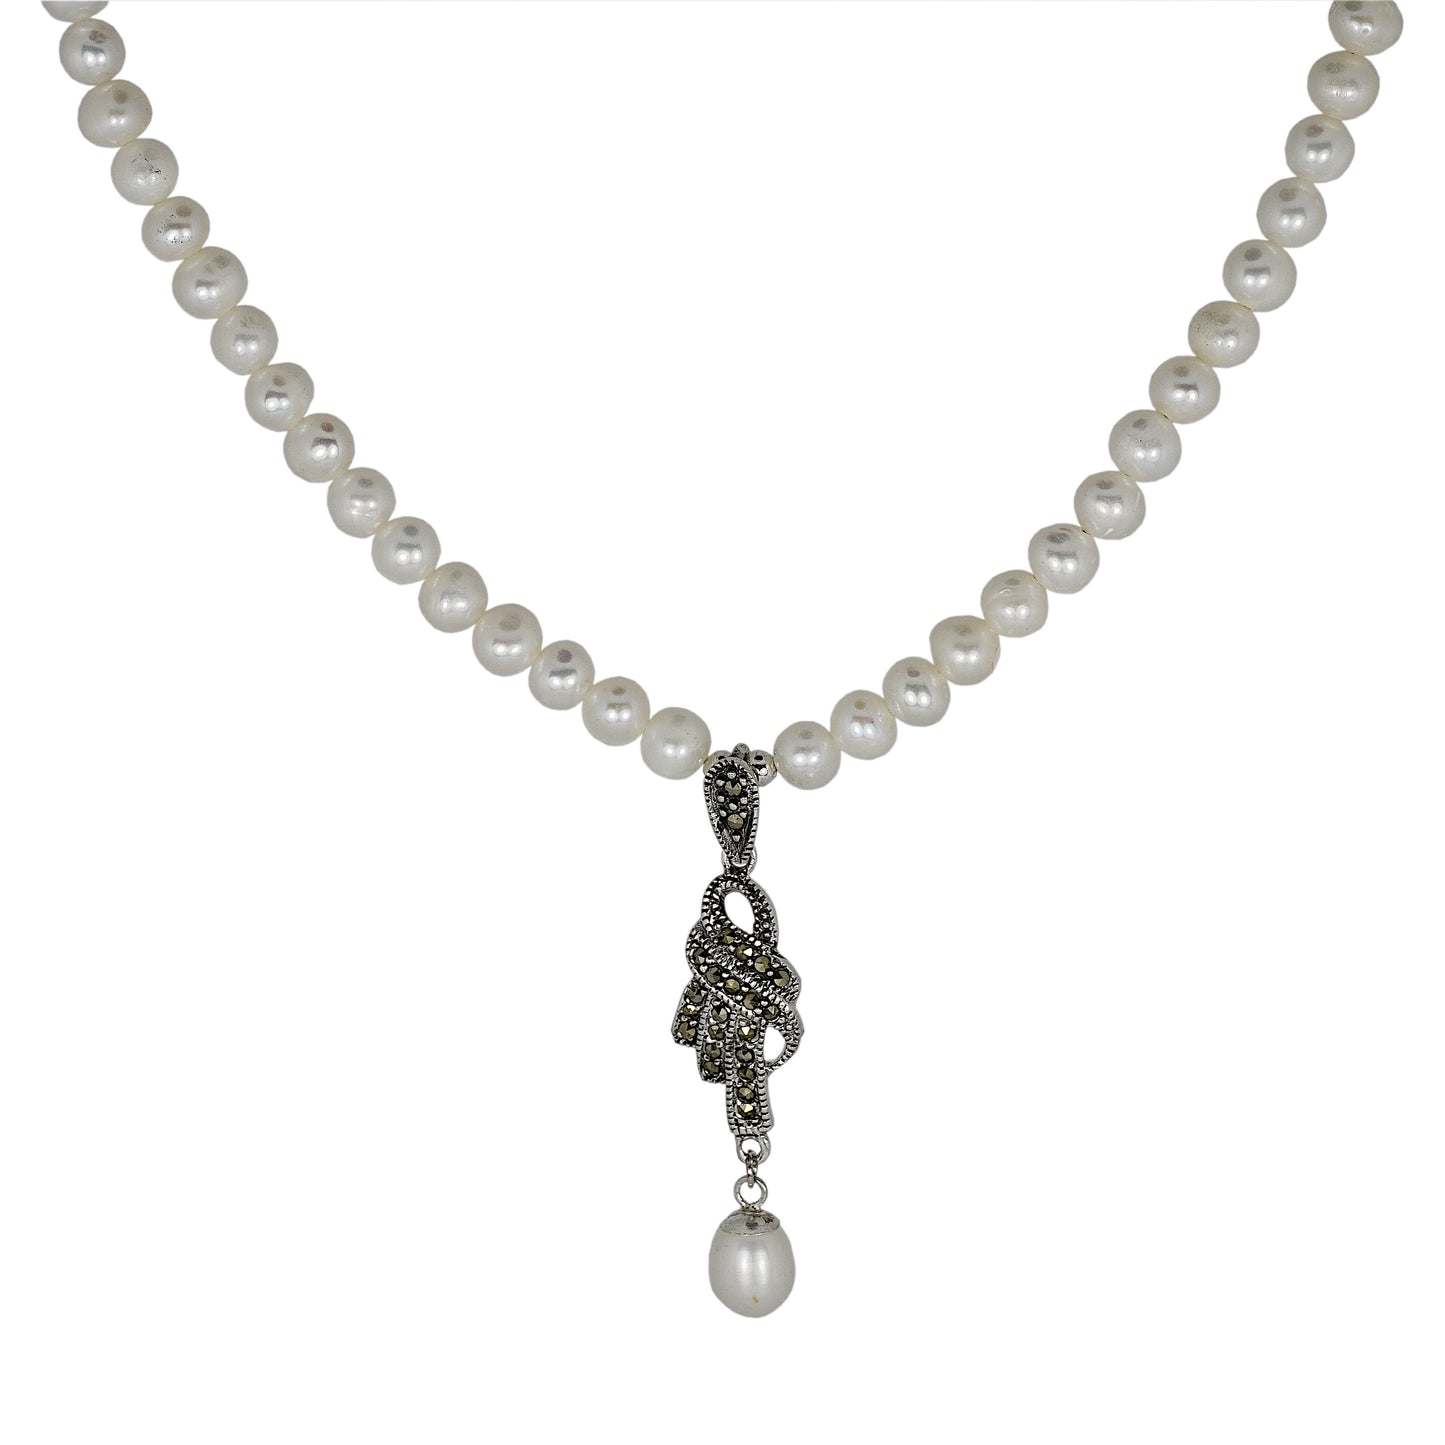 Handmade Freshwater Cultured Pearl Necklace With Marcasite and Pearl Pendant